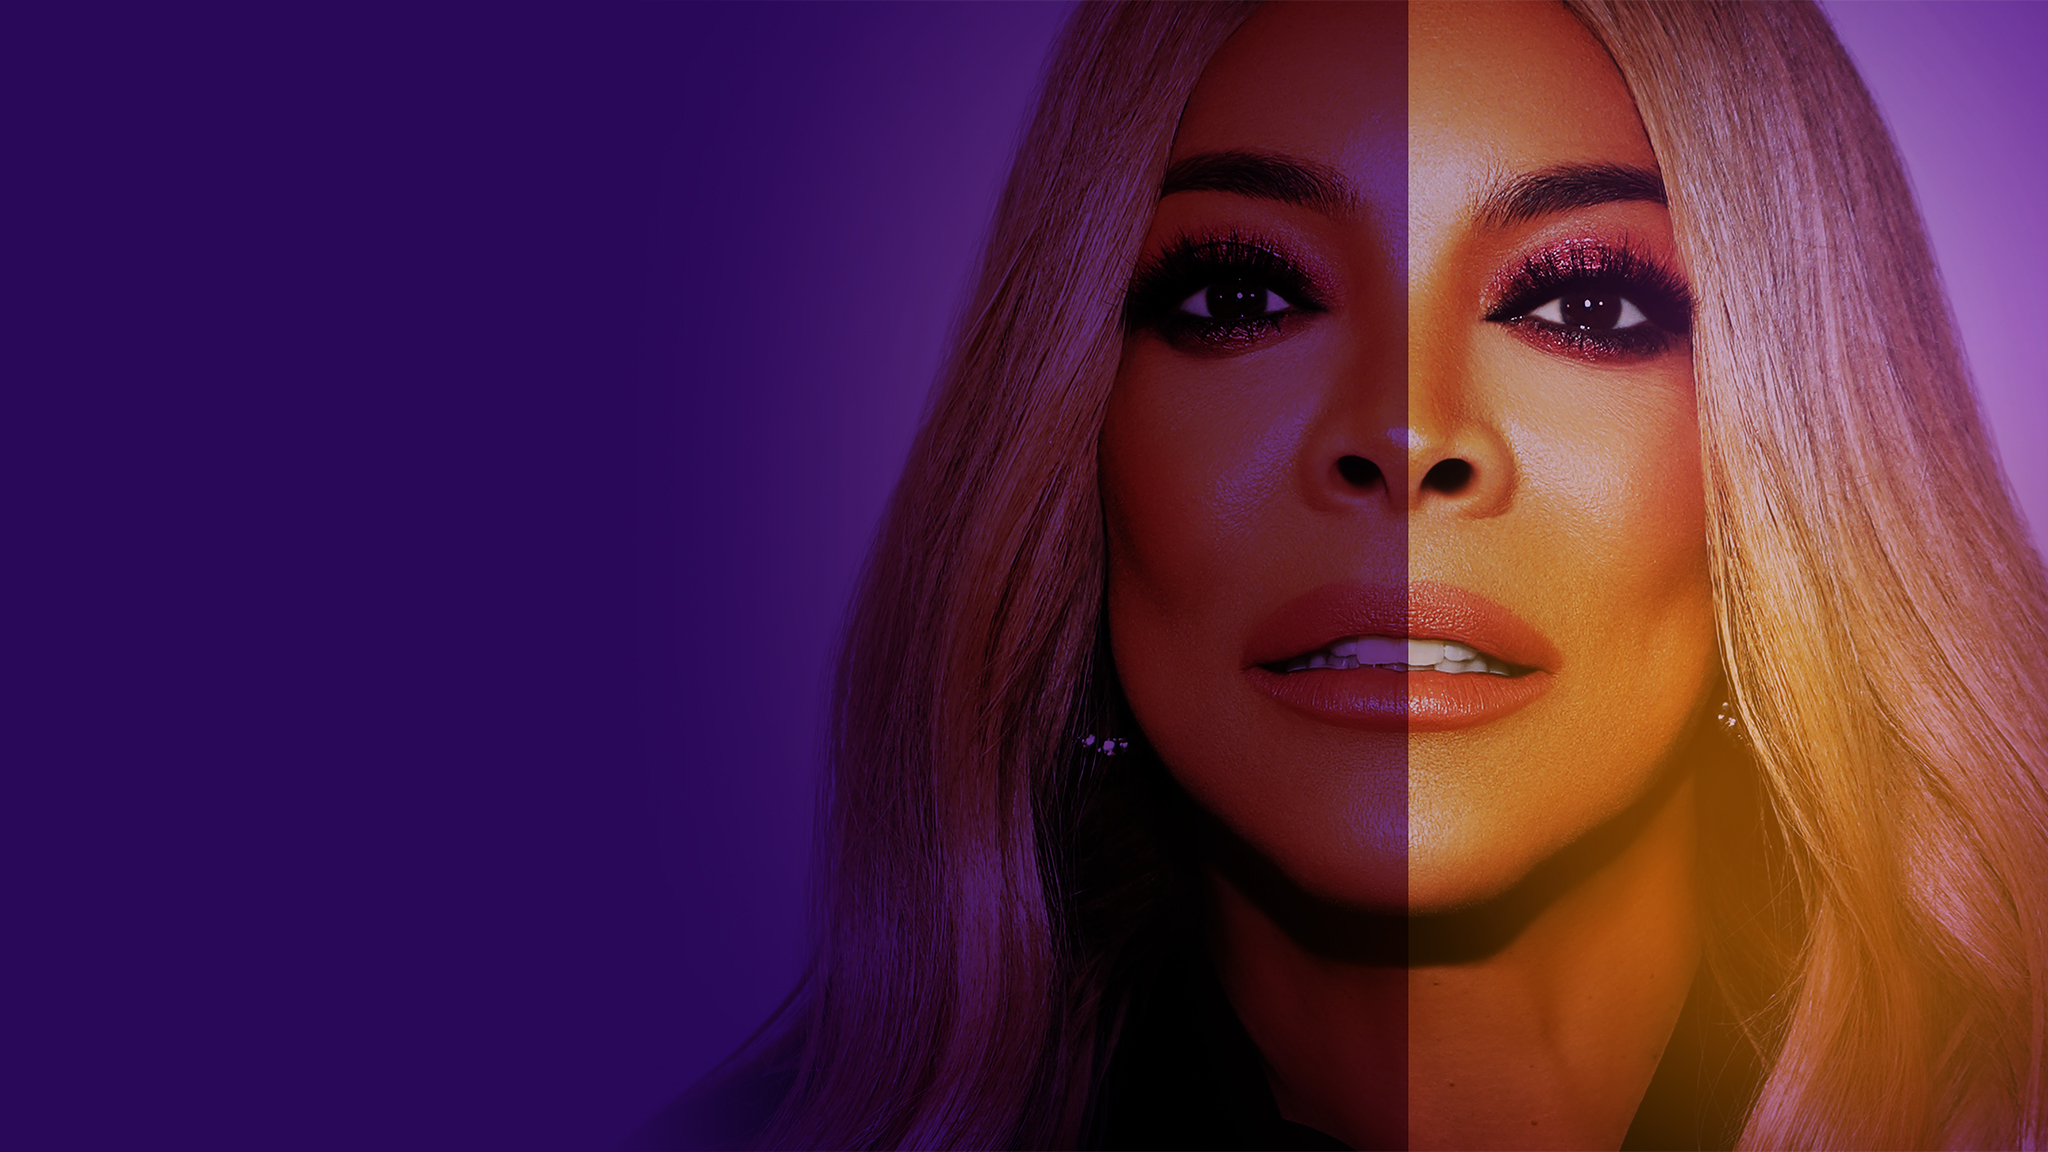 Where is Wendy Williams?